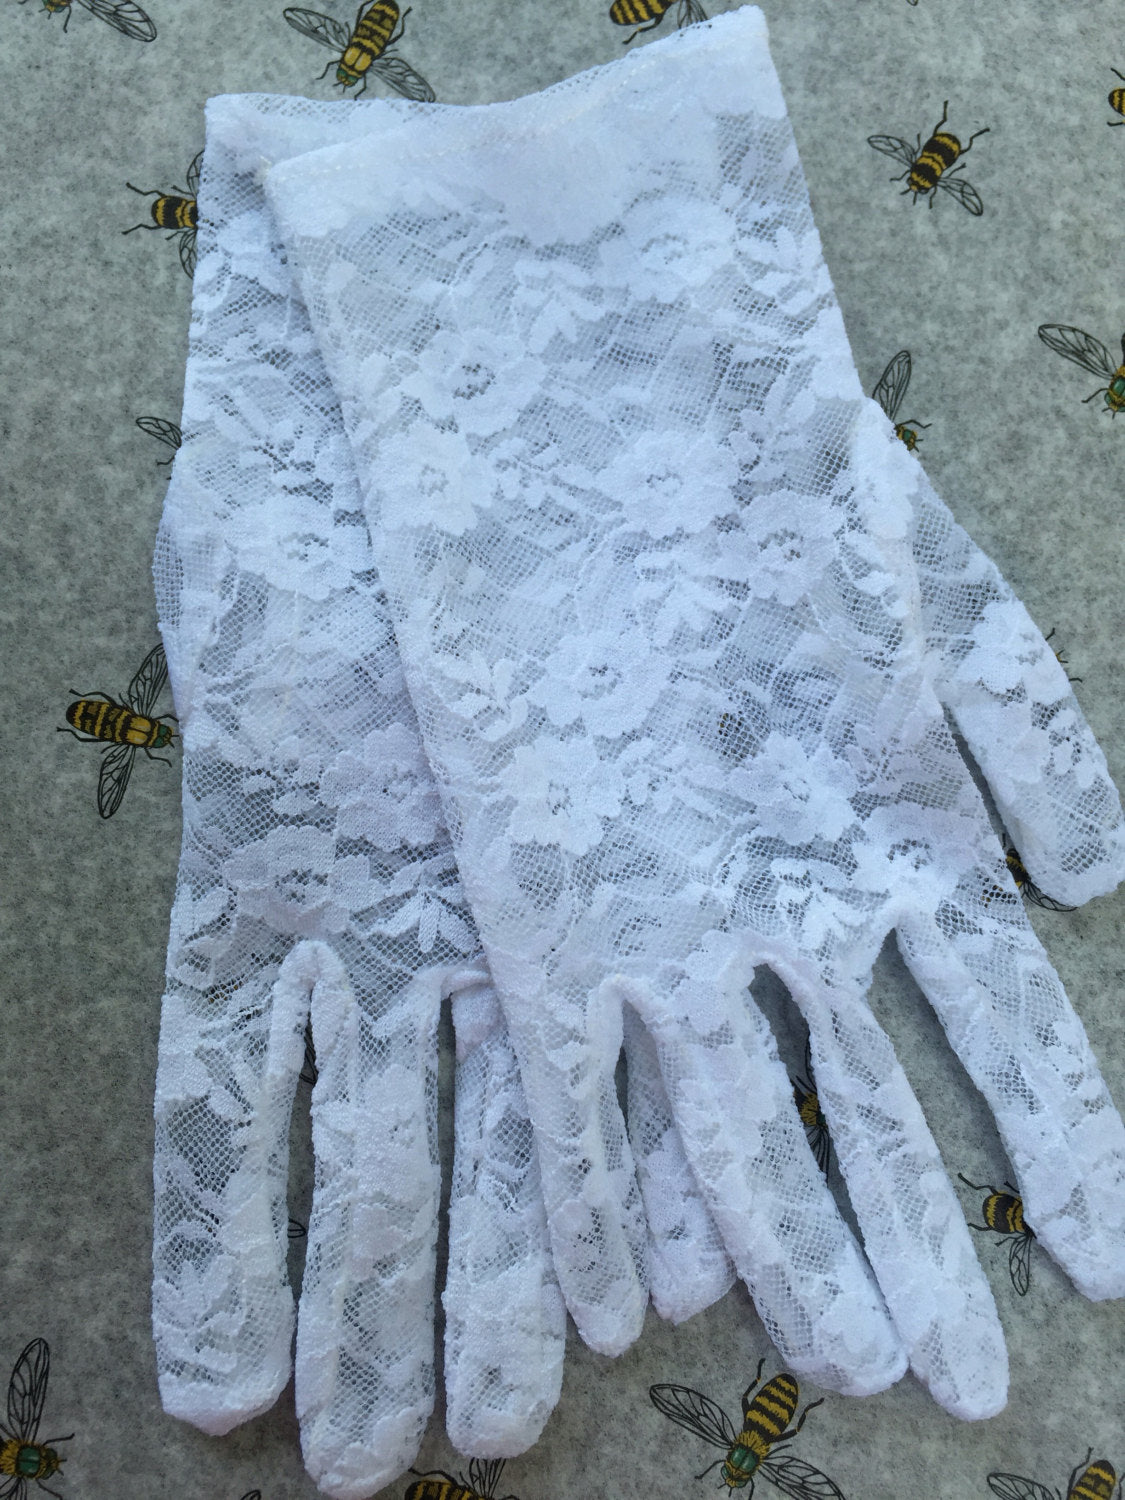 White Lace Gloves